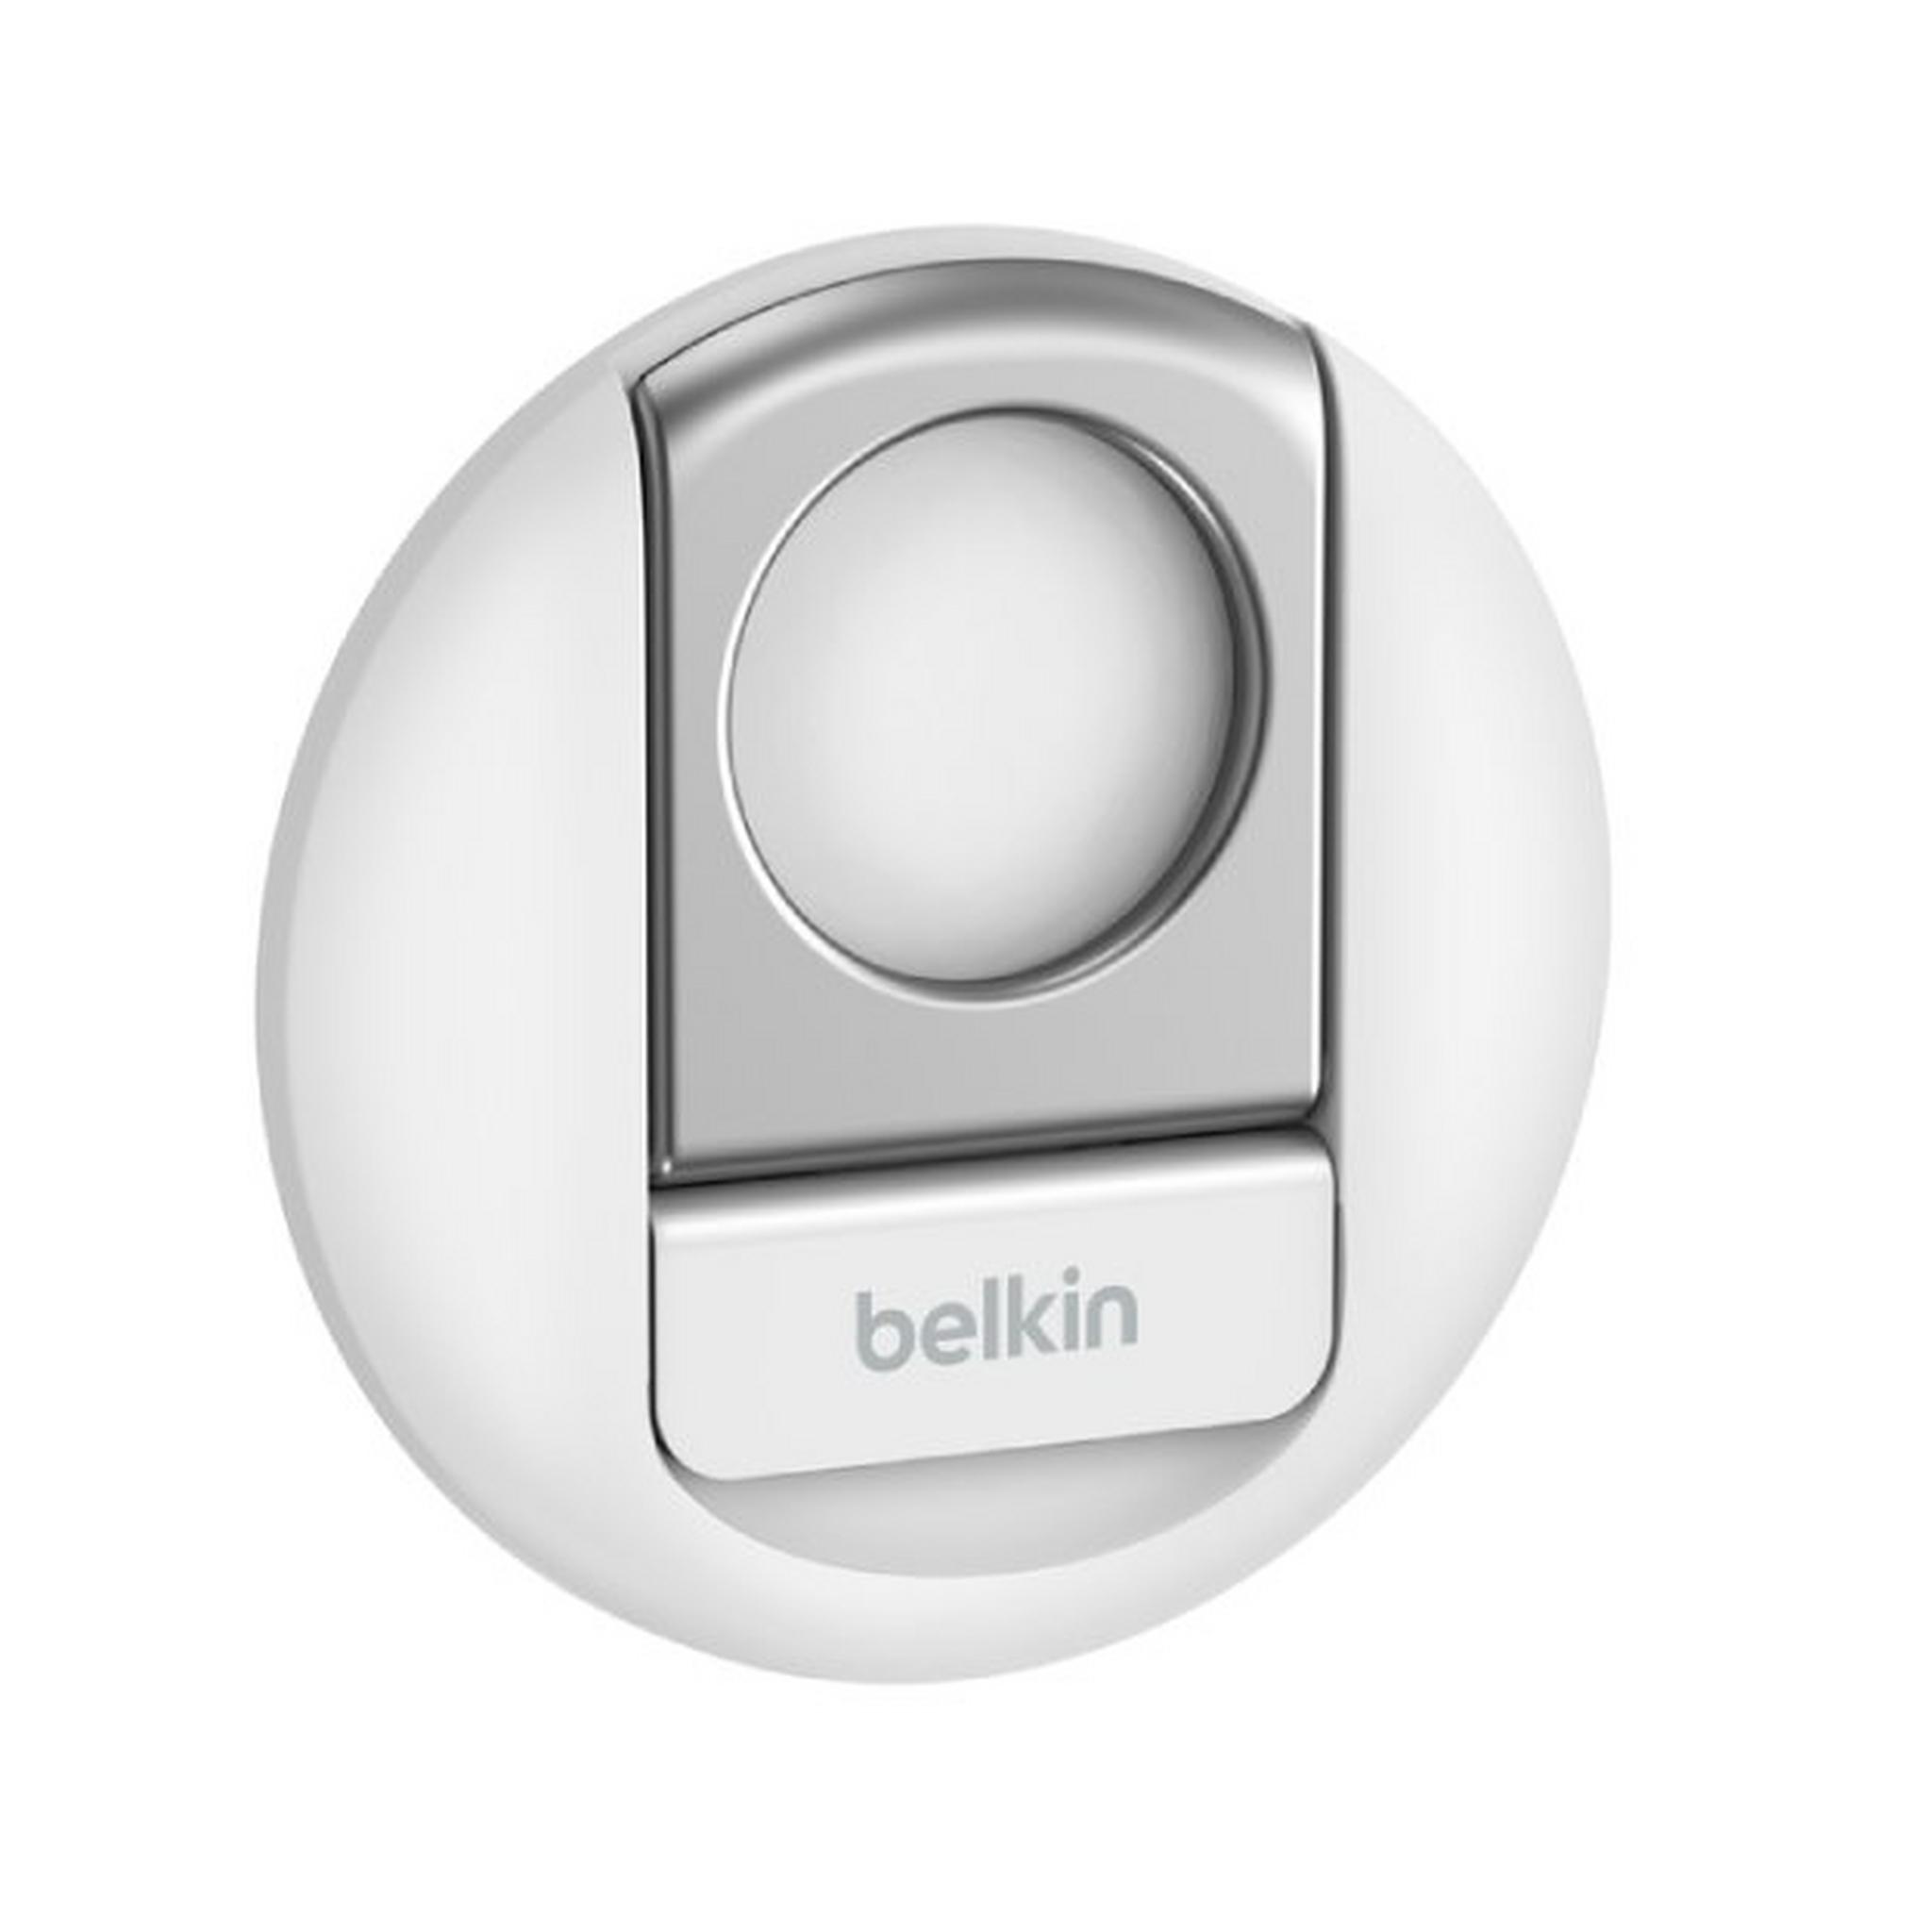 Belkin iPhone Mount with MagSafe for MacBook, MMA006BTWH – White